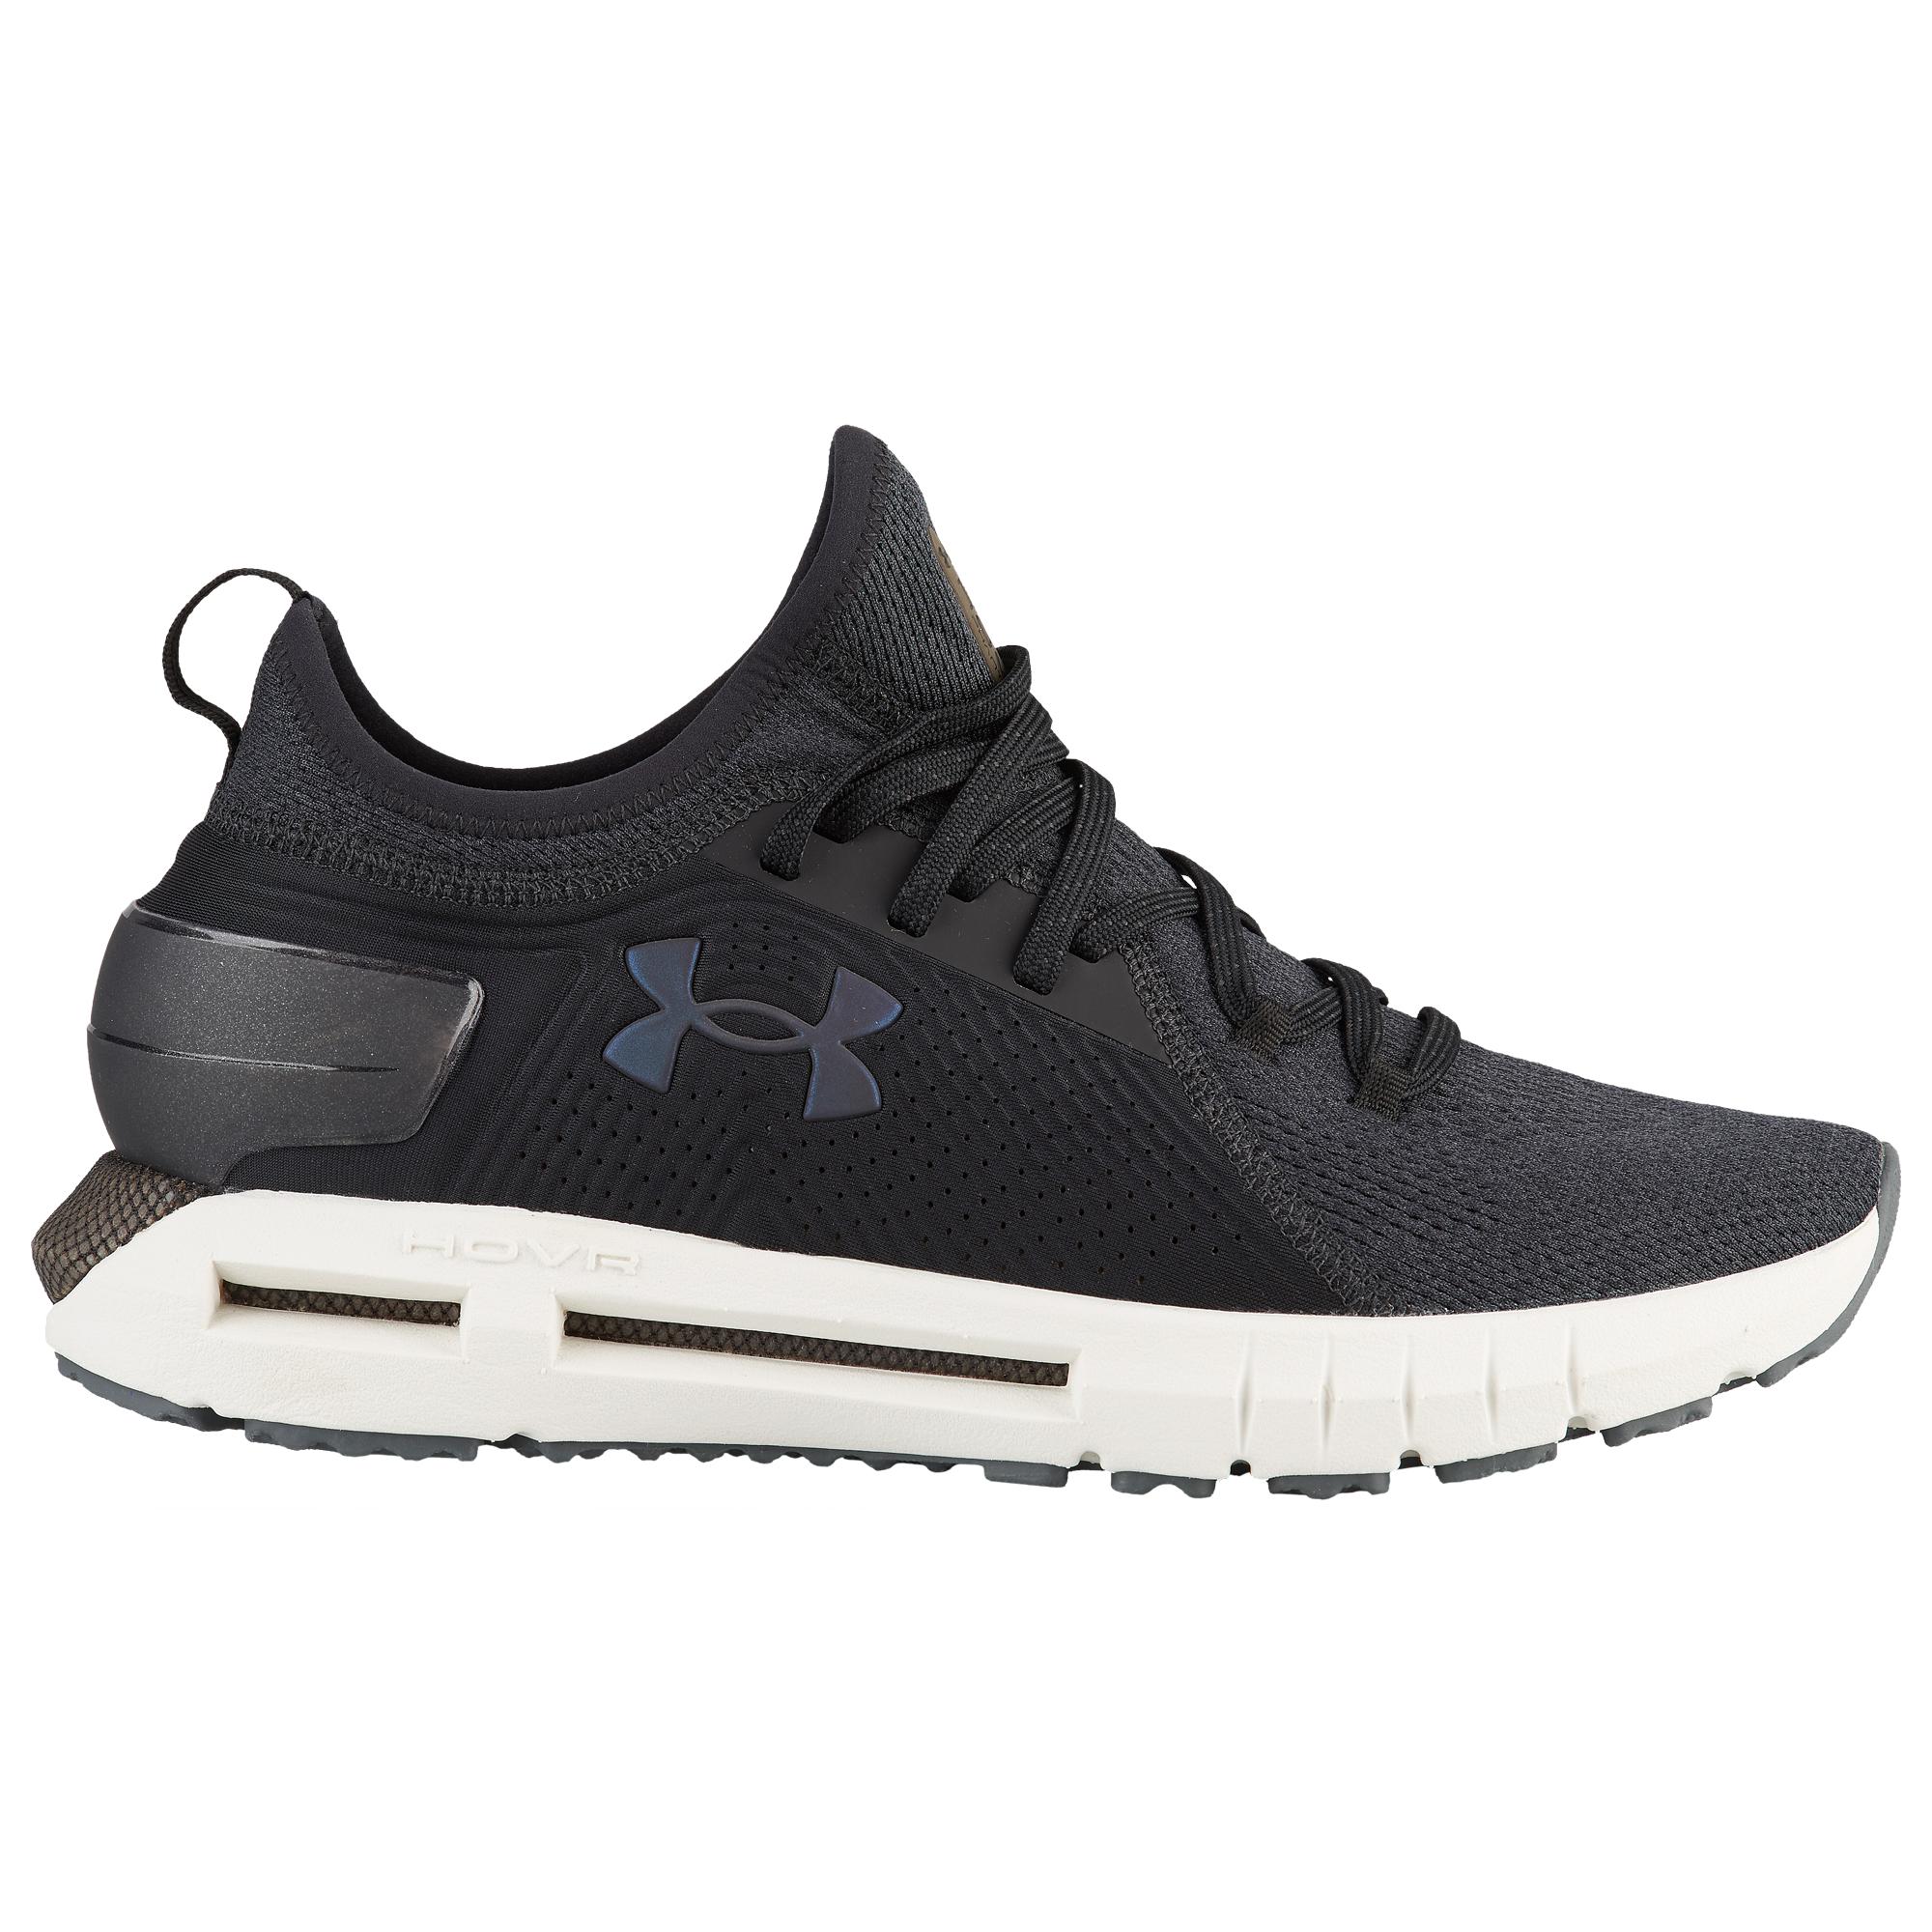 Under Armour Synthetic Hovr Phantom Se Running Shoes in Black/Onyx ...